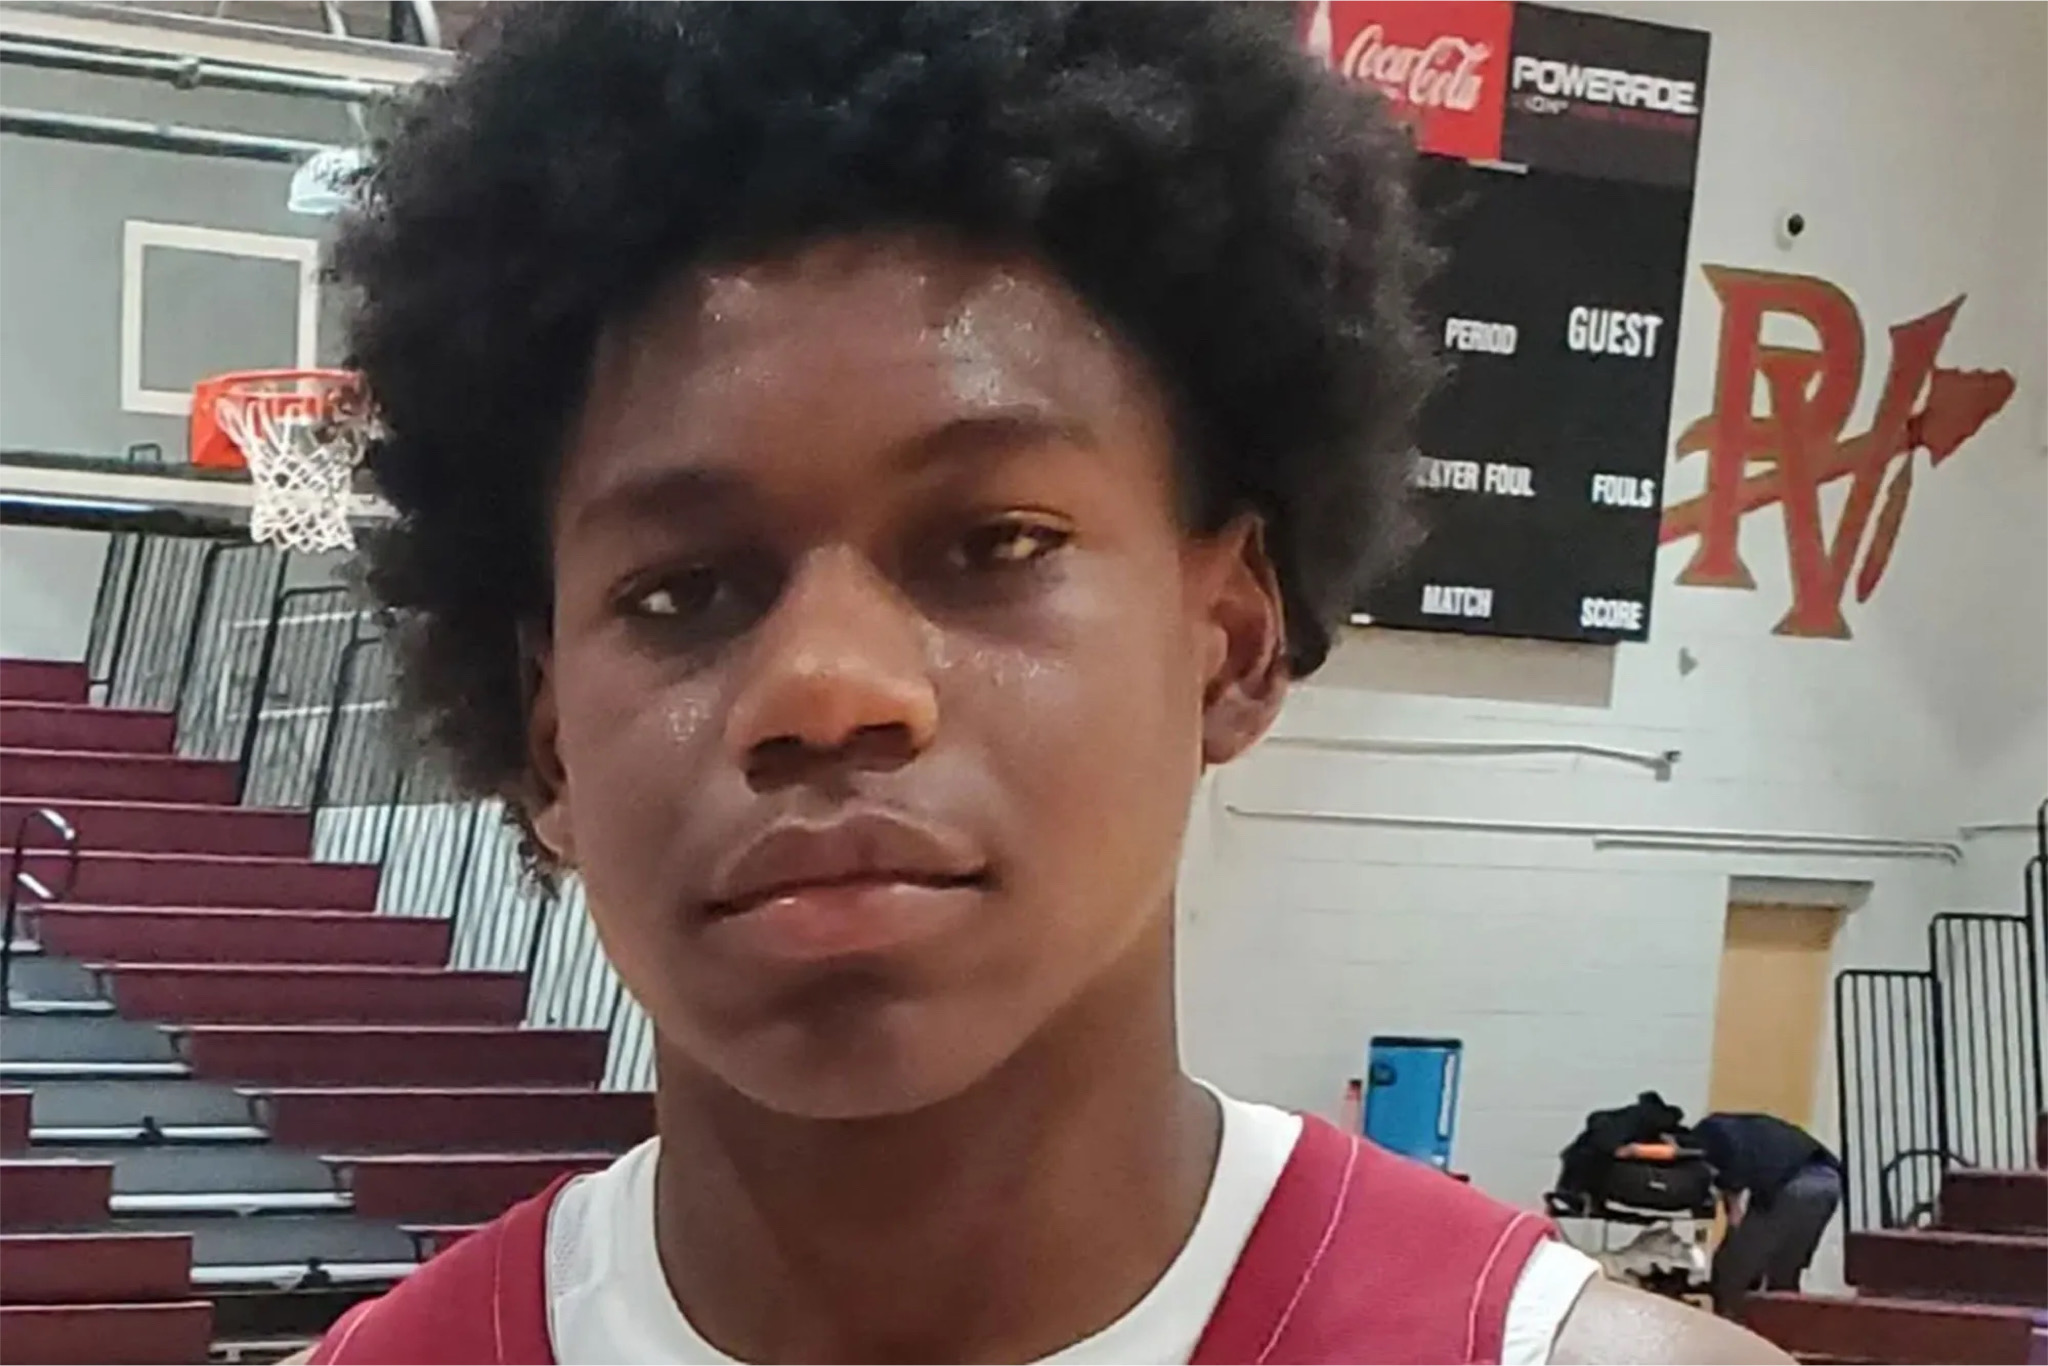 Alabama High School Basketball Star Caleb White Dies After Collapsing